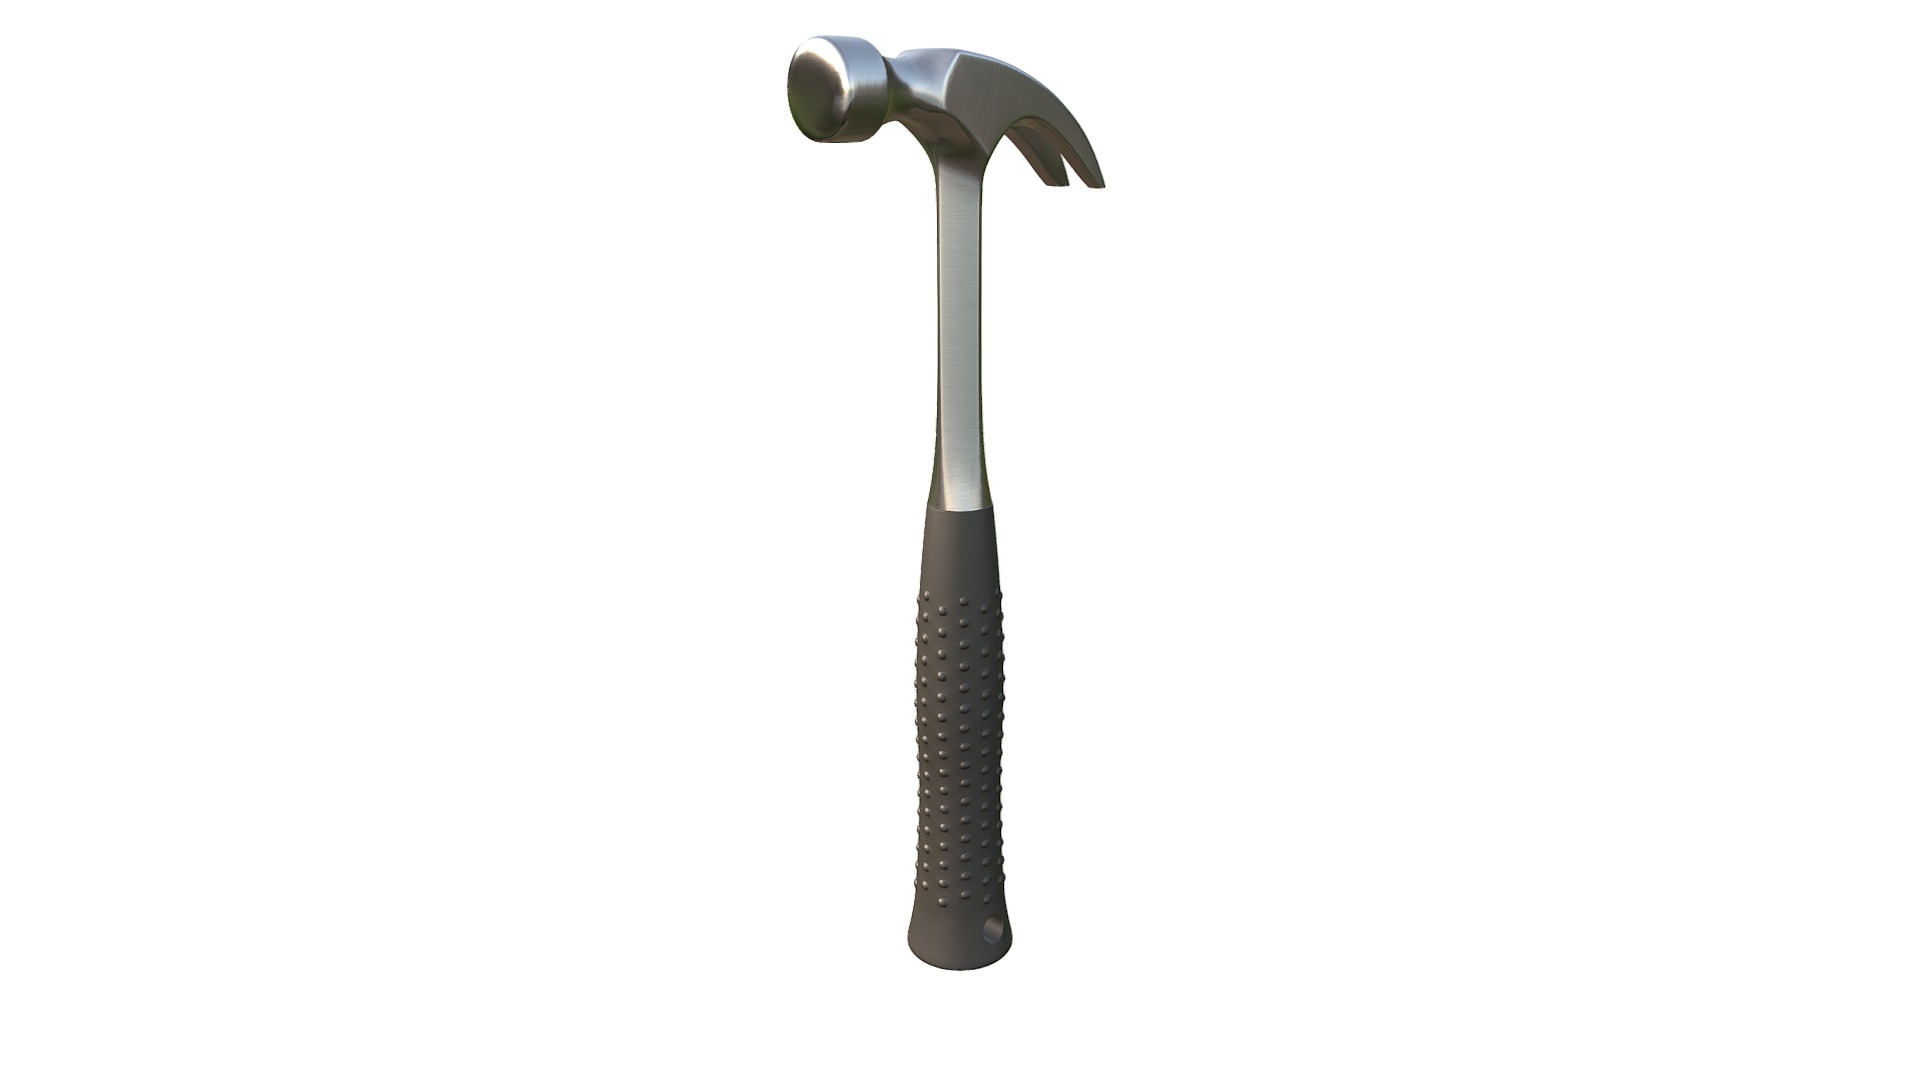 3D model Regular claw hammer - This is a 3D model of the Regular claw hammer. The 3D model is about a silver and black sword.